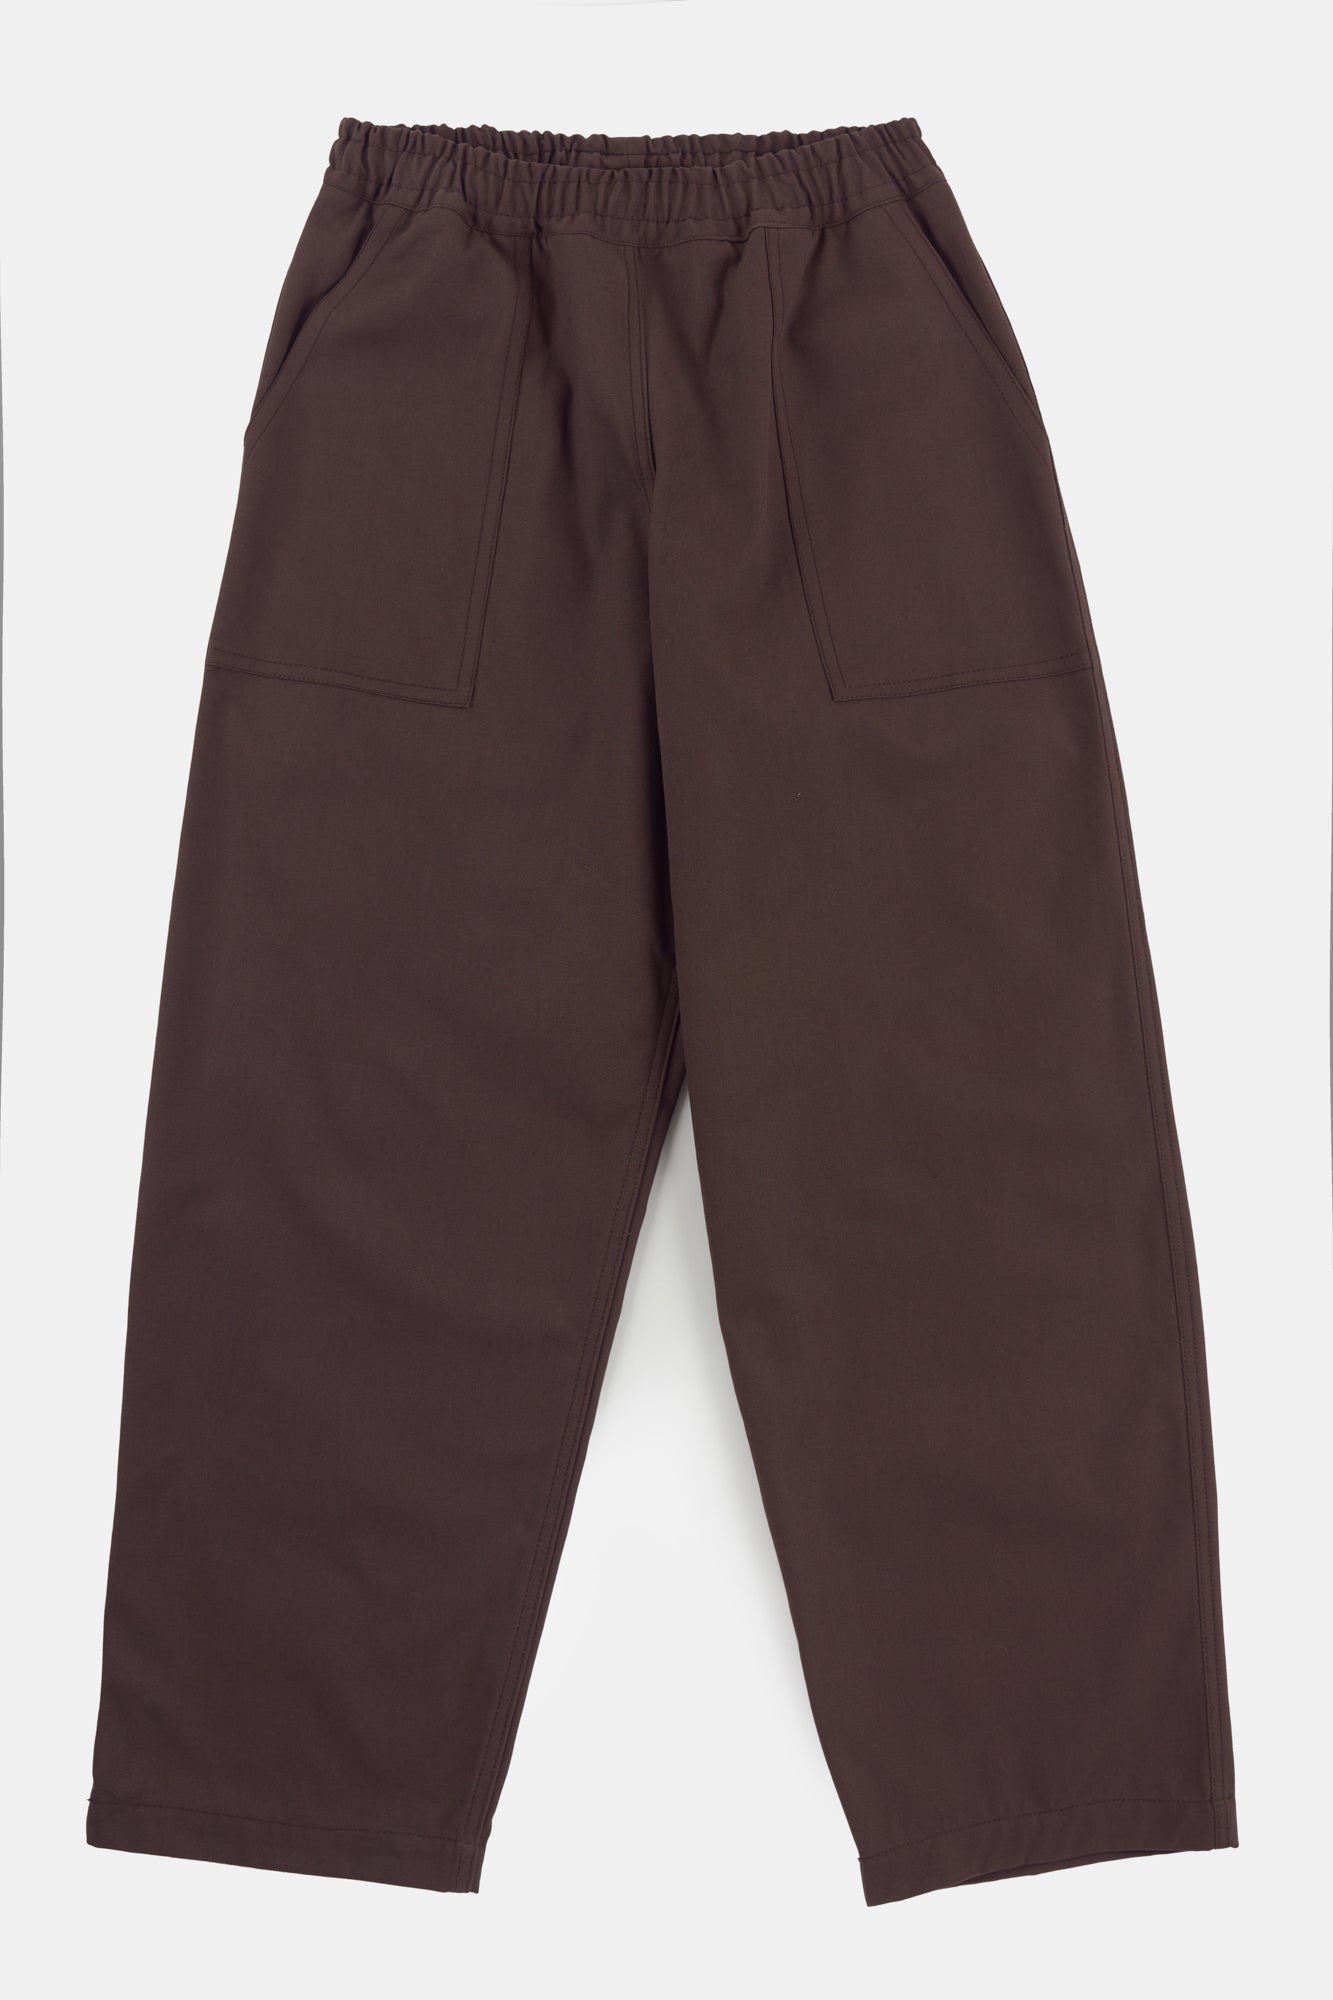 Cameraman Pant Drawstring Tapered Cotton Canvas Trousers - Brown -  Community Clothing